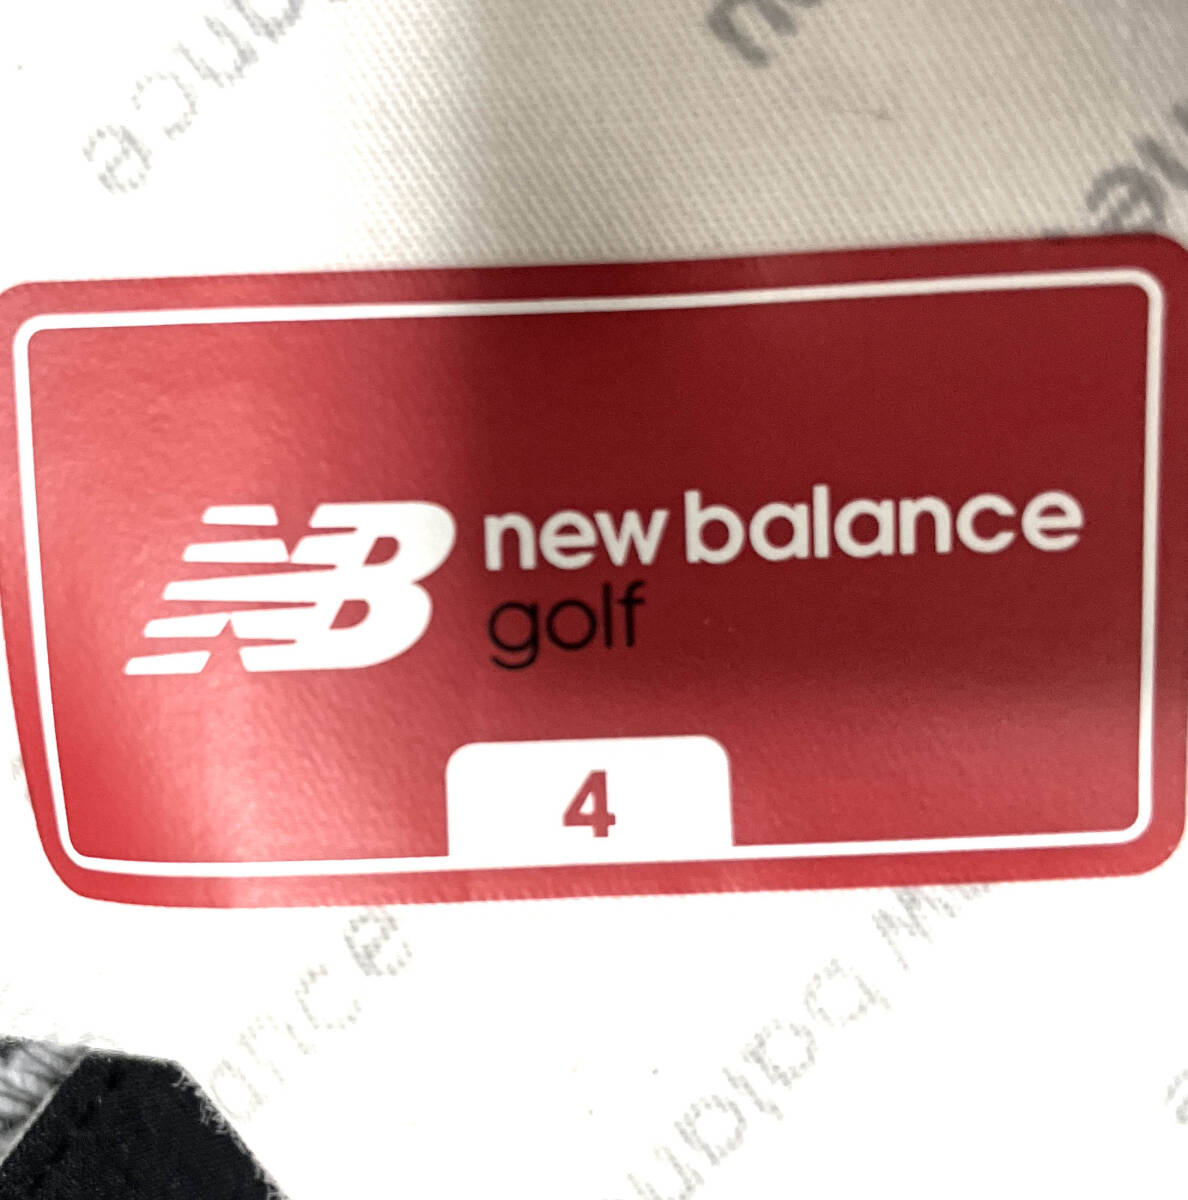  spring summer oriented *NewBalance GOLF New balance Golf * a little thin stretch pants *W80~84cm rank * men's M size rank * all country postage 230 jpy 